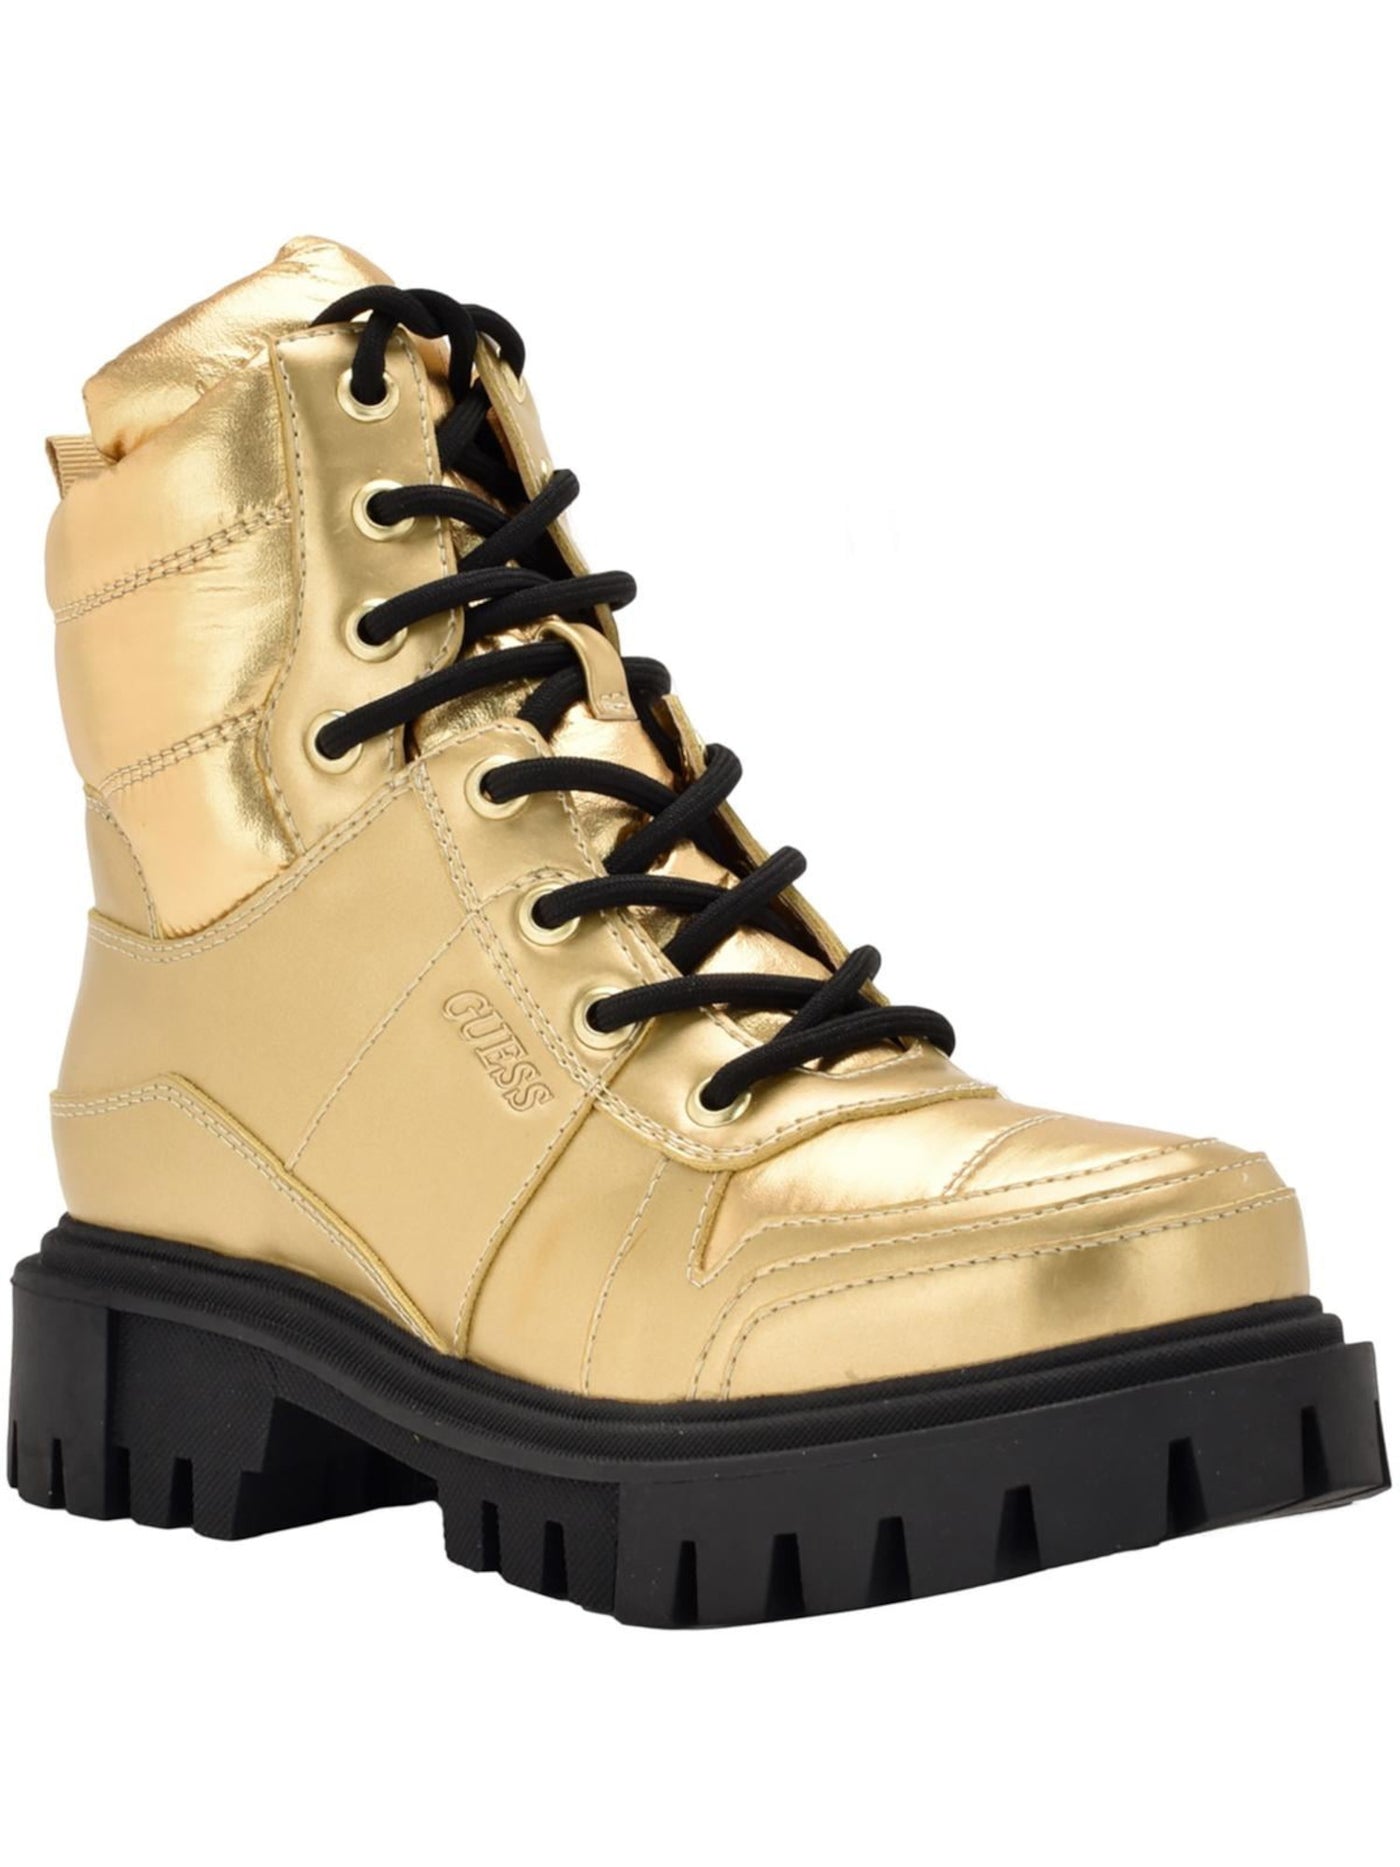 GUESS Womens Gold 1" Platform Back Pull-Tab Lug Sole Padded Tisley Round Toe Block Heel Lace-Up Combat Boots 6 M